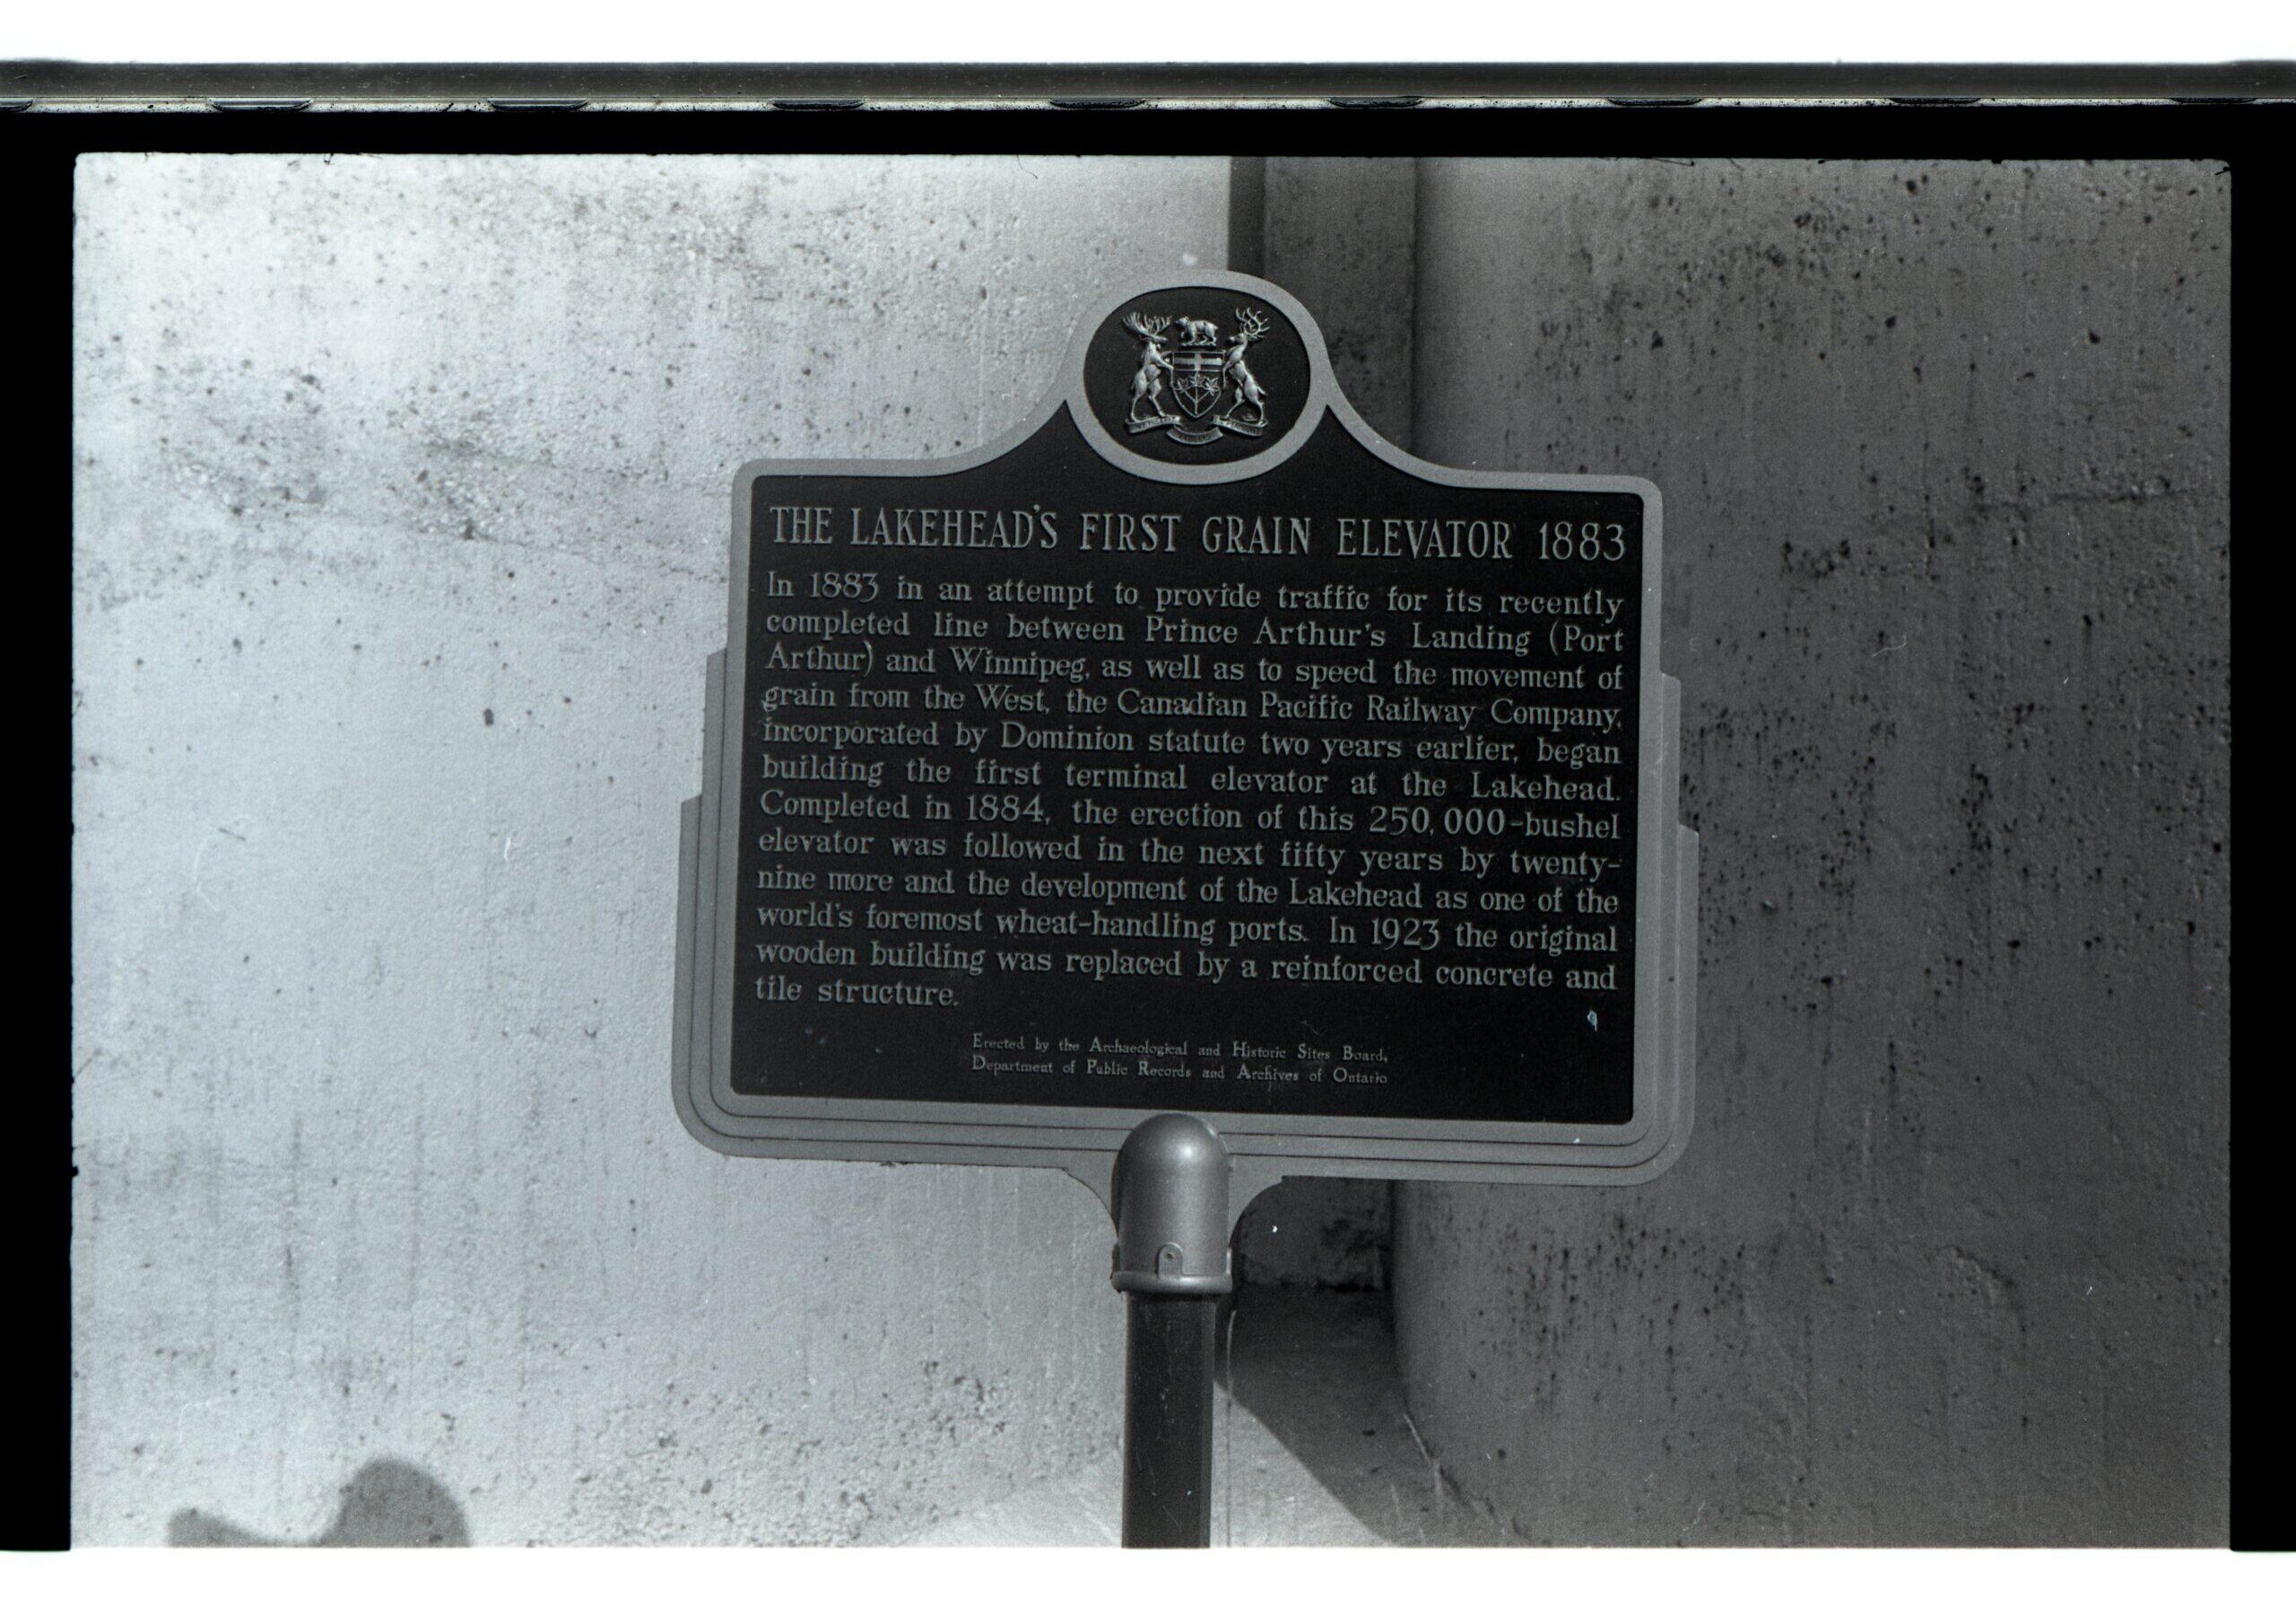 Signage with embelem of Ontario Coat of Arms. Sign reads "THE LAKEHEAD'S FIRST GRAIN ELEVATOR 1883. In 1883 in an attempt to provide traffic for its recently completed line between Prince Arthur's Landing (Port Arthur) and Winnipeg, as well as to speed the movement of grain from the West, the Canadian Pacific Railway Company incorporated by Cominion statue two years earlier, began building the first terminal elevator at the Lakehead. Completed in 1884, the erection of this 250,000-bushel elevator was followed in the next fifty years by twenty-nine more and the development of the Lakehead as one of the world's foremost wheat-habdling ports. In 1923 the original wooden building was replaced by a reinforced concrete and tile structure"